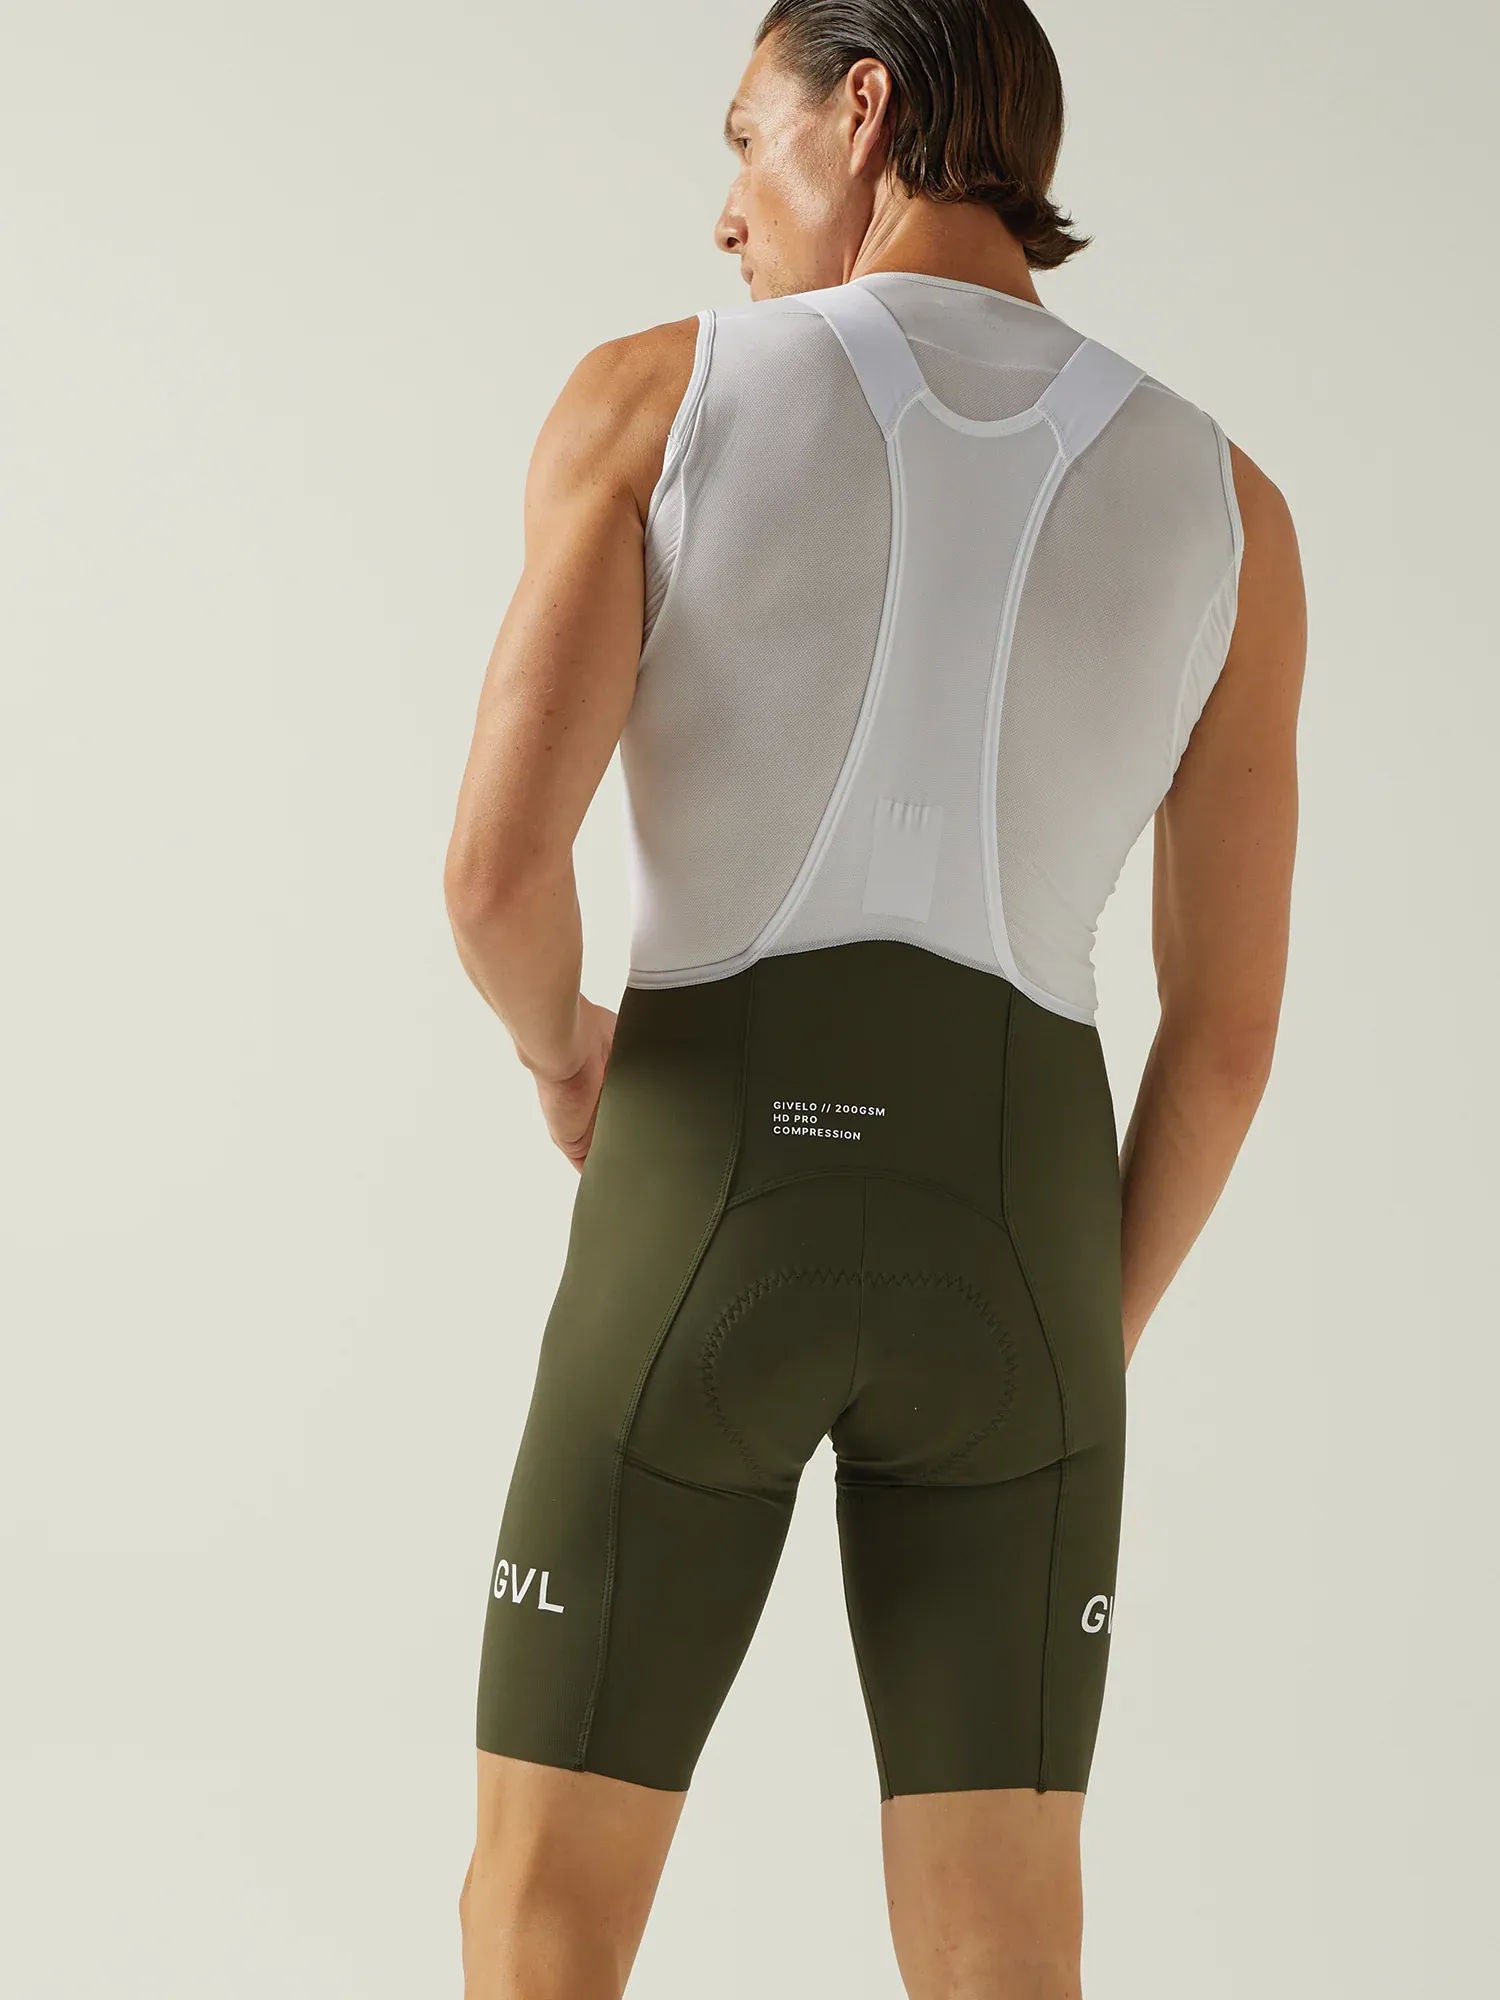 Givelo Men's HD Pro Olive ビブショーツ | GEARED